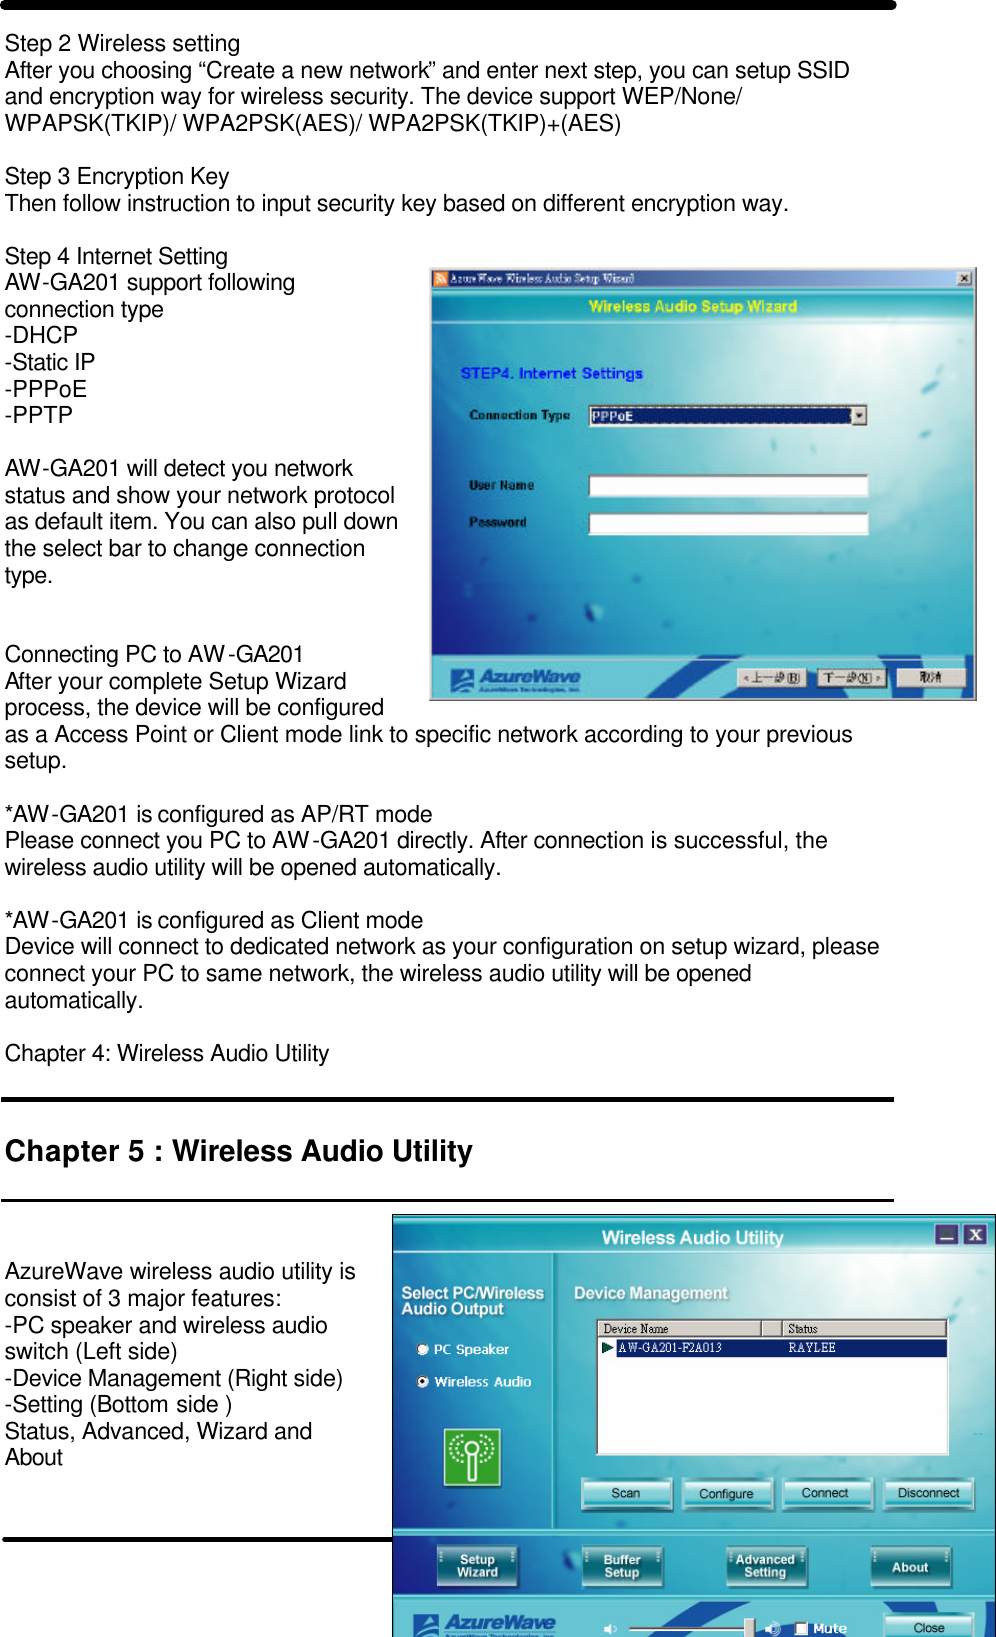   8 Step 2 Wireless setting  After you choosing “Create a new network” and enter next step, you can setup SSID and encryption way for wireless security. The device support WEP/None/ WPAPSK(TKIP)/ WPA2PSK(AES)/ WPA2PSK(TKIP)+(AES)  Step 3 Encryption Key Then follow instruction to input security key based on different encryption way.   Step 4 Internet Setting AW-GA201 support following connection type -DHCP -Static IP -PPPoE -PPTP  AW-GA201 will detect you network status and show your network protocol as default item. You can also pull down the select bar to change connection type.    Connecting PC to AW-GA201 After your complete Setup Wizard process, the device will be configured as a Access Point or Client mode link to specific network according to your previous setup.  *AW-GA201 is configured as AP/RT mode Please connect you PC to AW-GA201 directly. After connection is successful, the wireless audio utility will be opened automatically.  *AW-GA201 is configured as Client mode Device will connect to dedicated network as your configuration on setup wizard, please connect your PC to same network, the wireless audio utility will be opened automatically.  Chapter 4: Wireless Audio Utility   Chapter 5 : Wireless Audio Utility    AzureWave wireless audio utility is consist of 3 major features:  -PC speaker and wireless audio switch (Left side) -Device Management (Right side) -Setting (Bottom side ) Status, Advanced, Wizard and About    